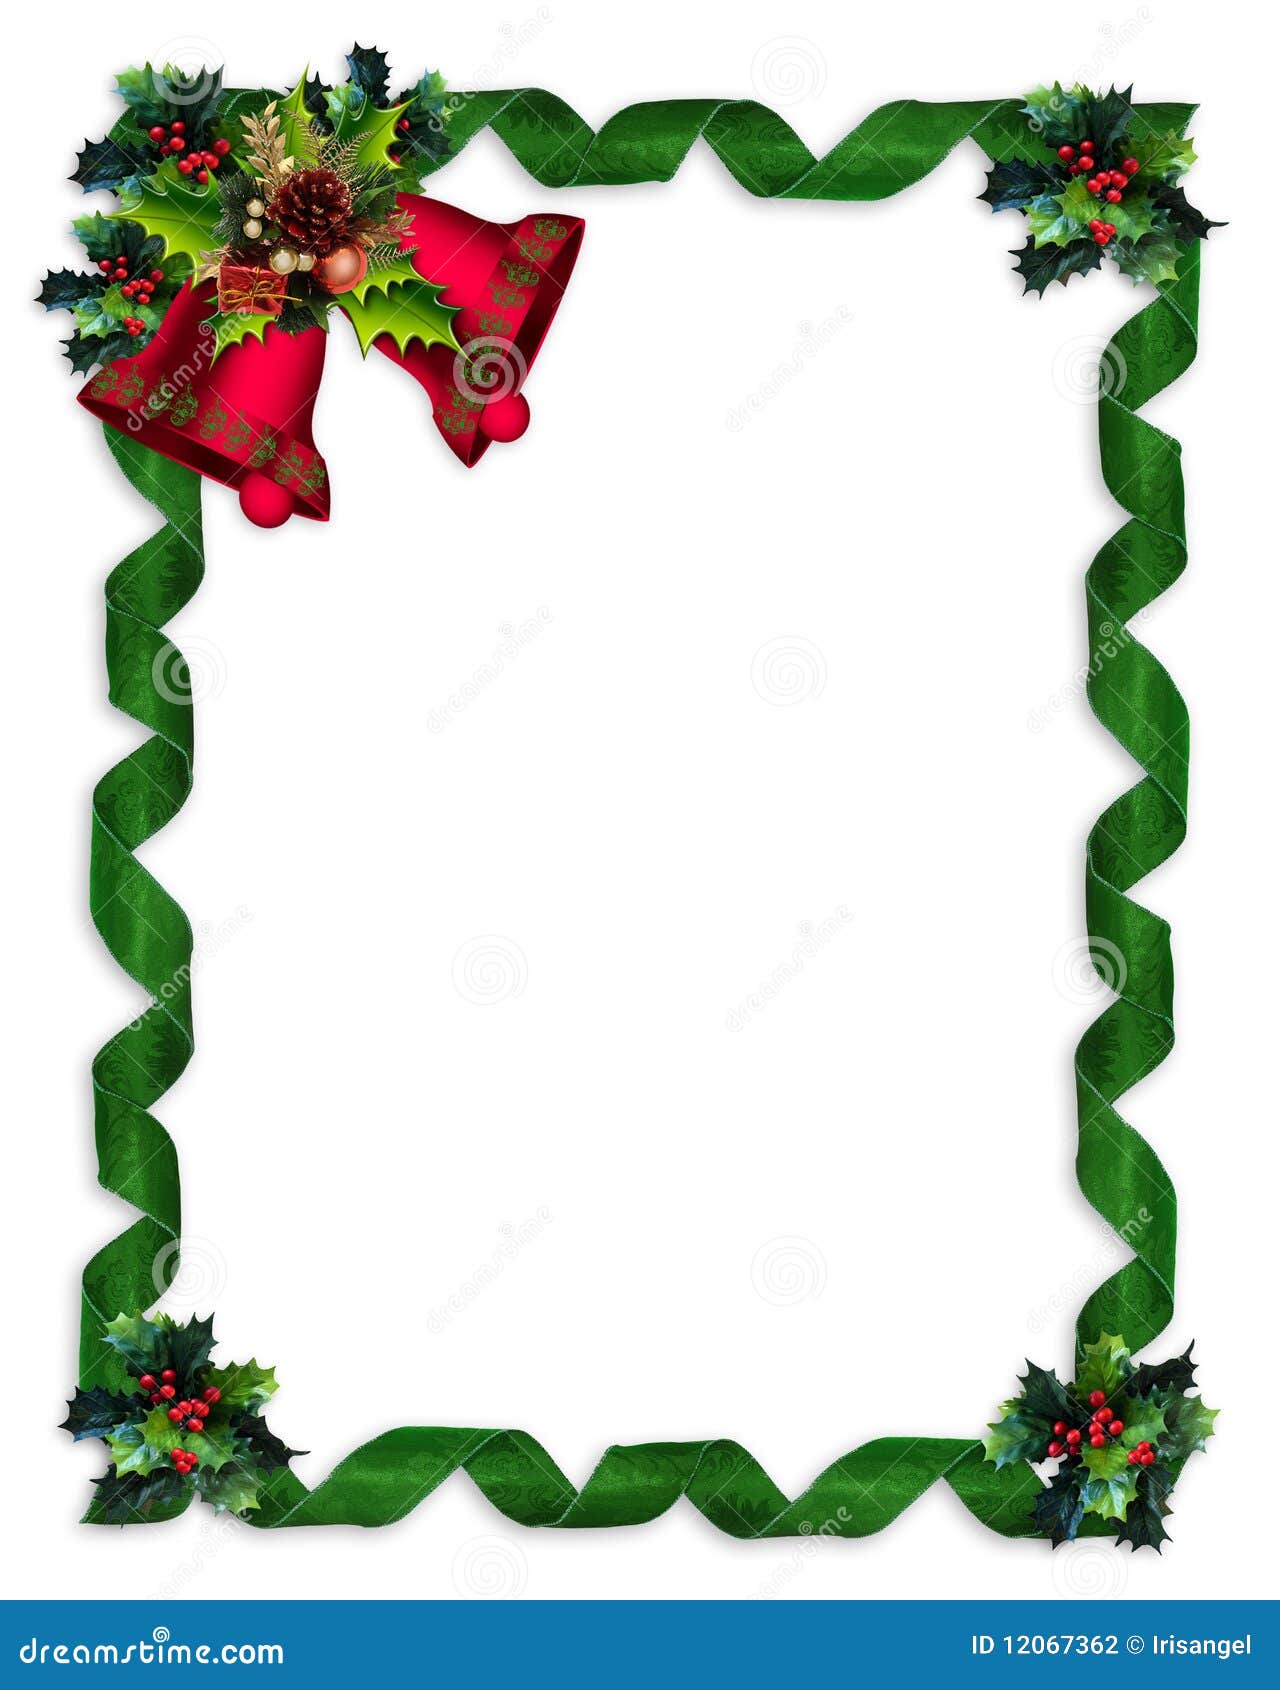 clipart christmas bells holly - photo #21